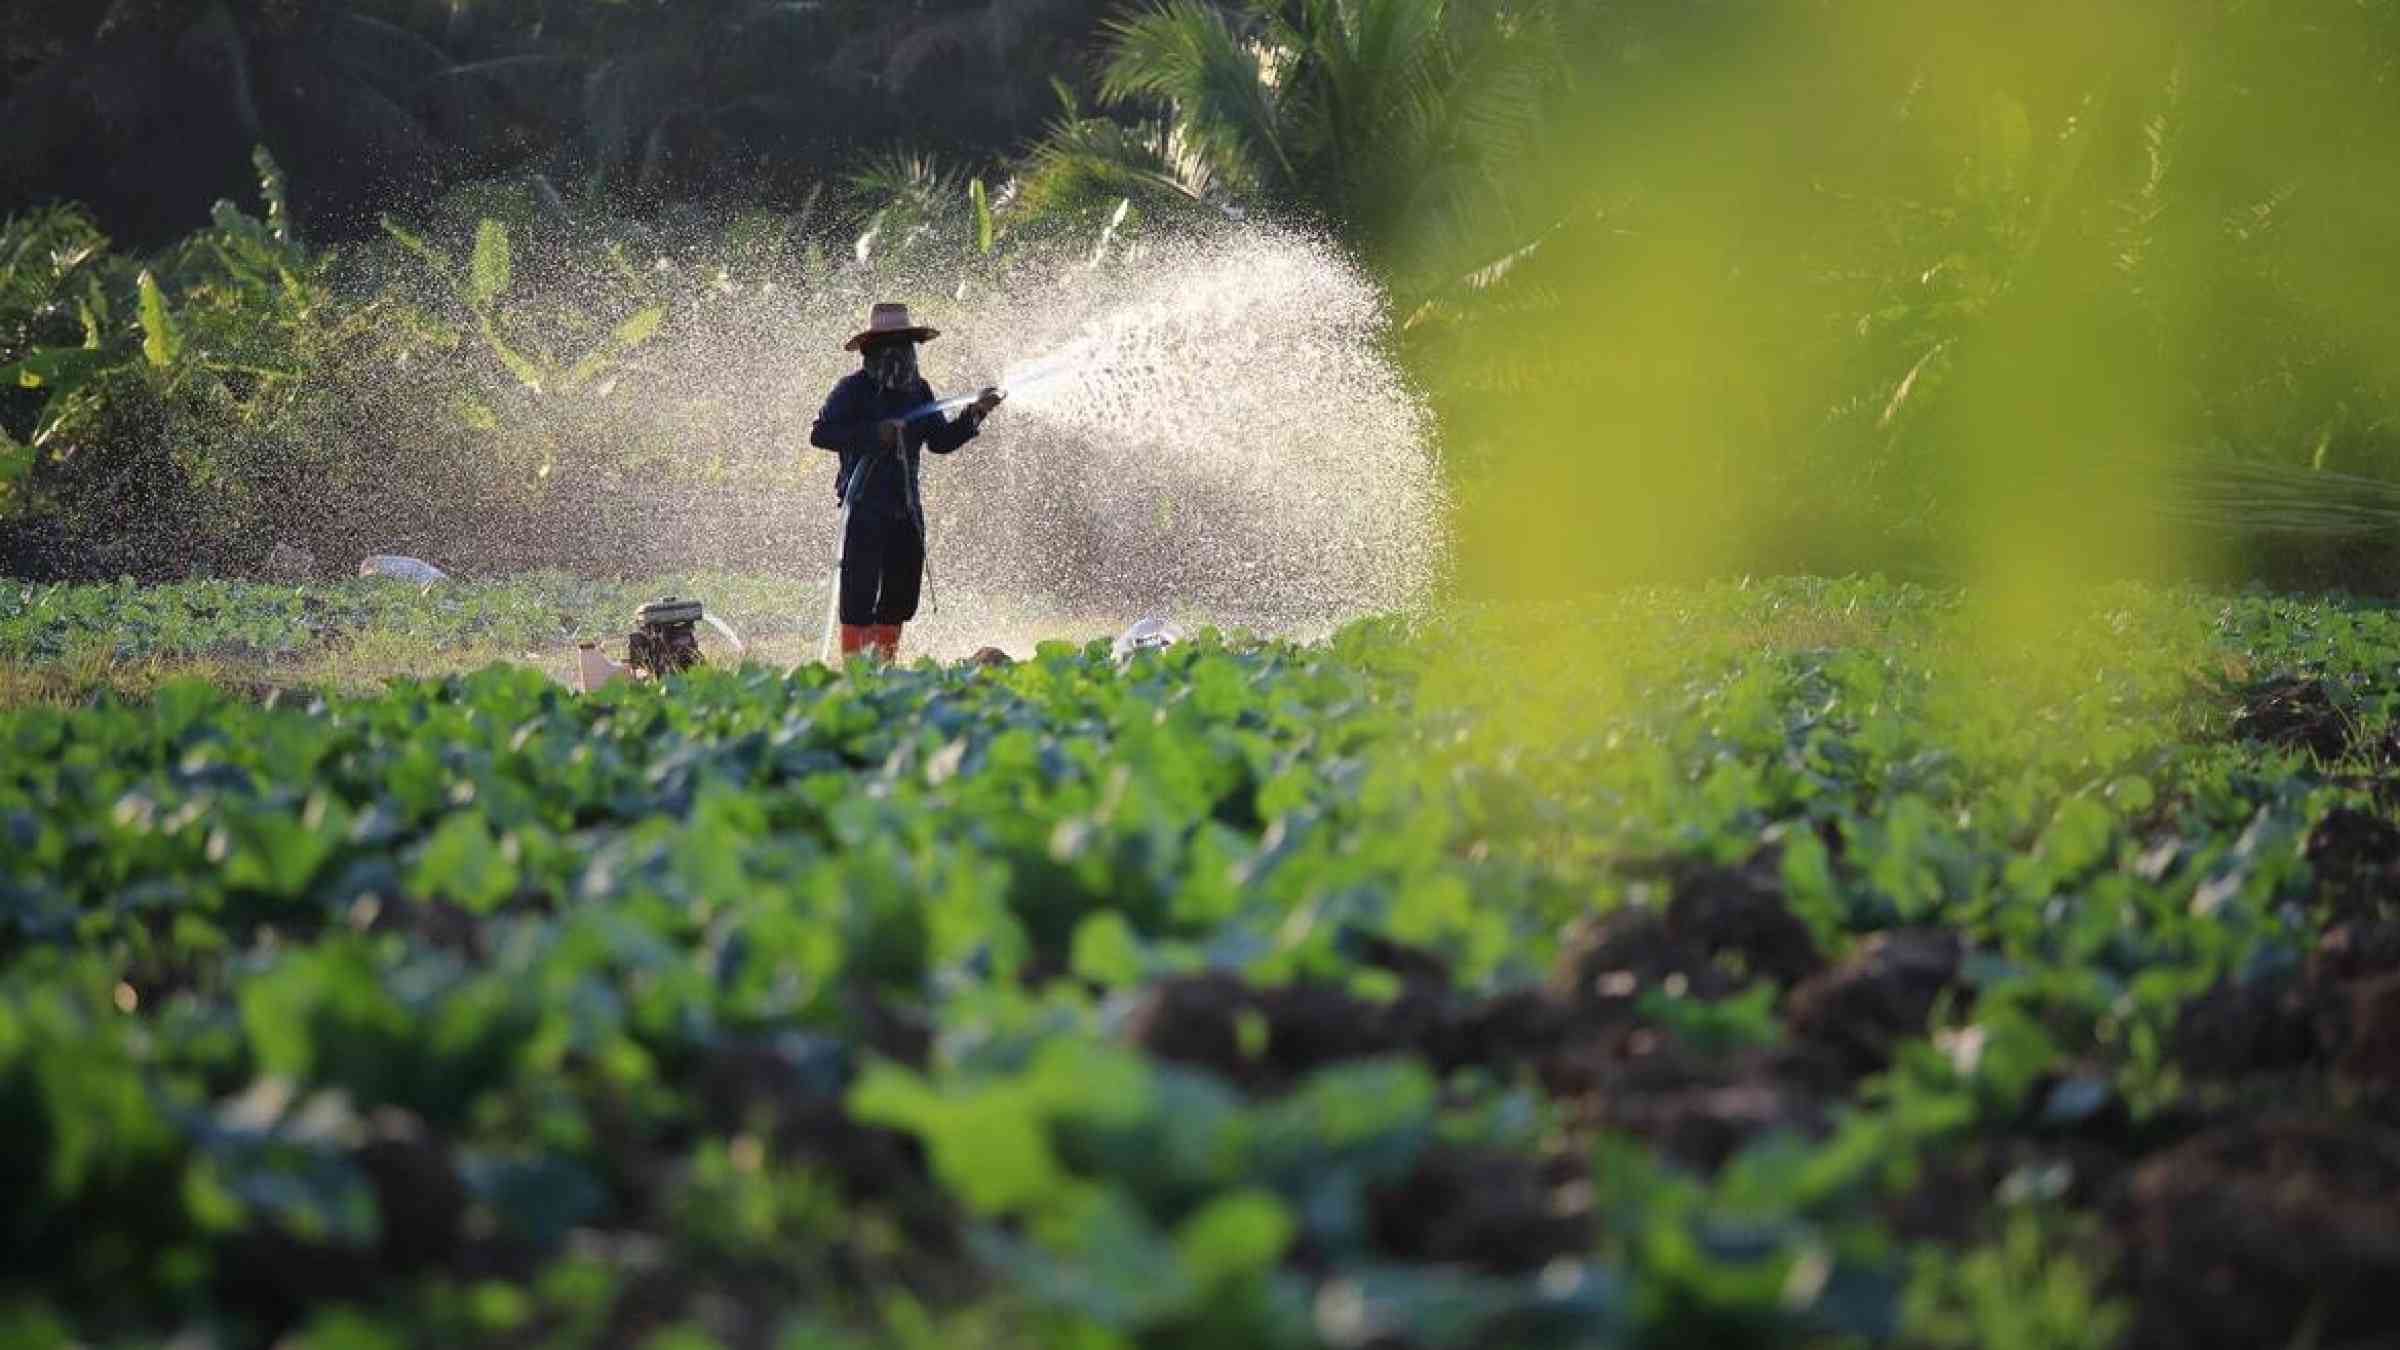 A Thai farmer waters crops with a rubber hose